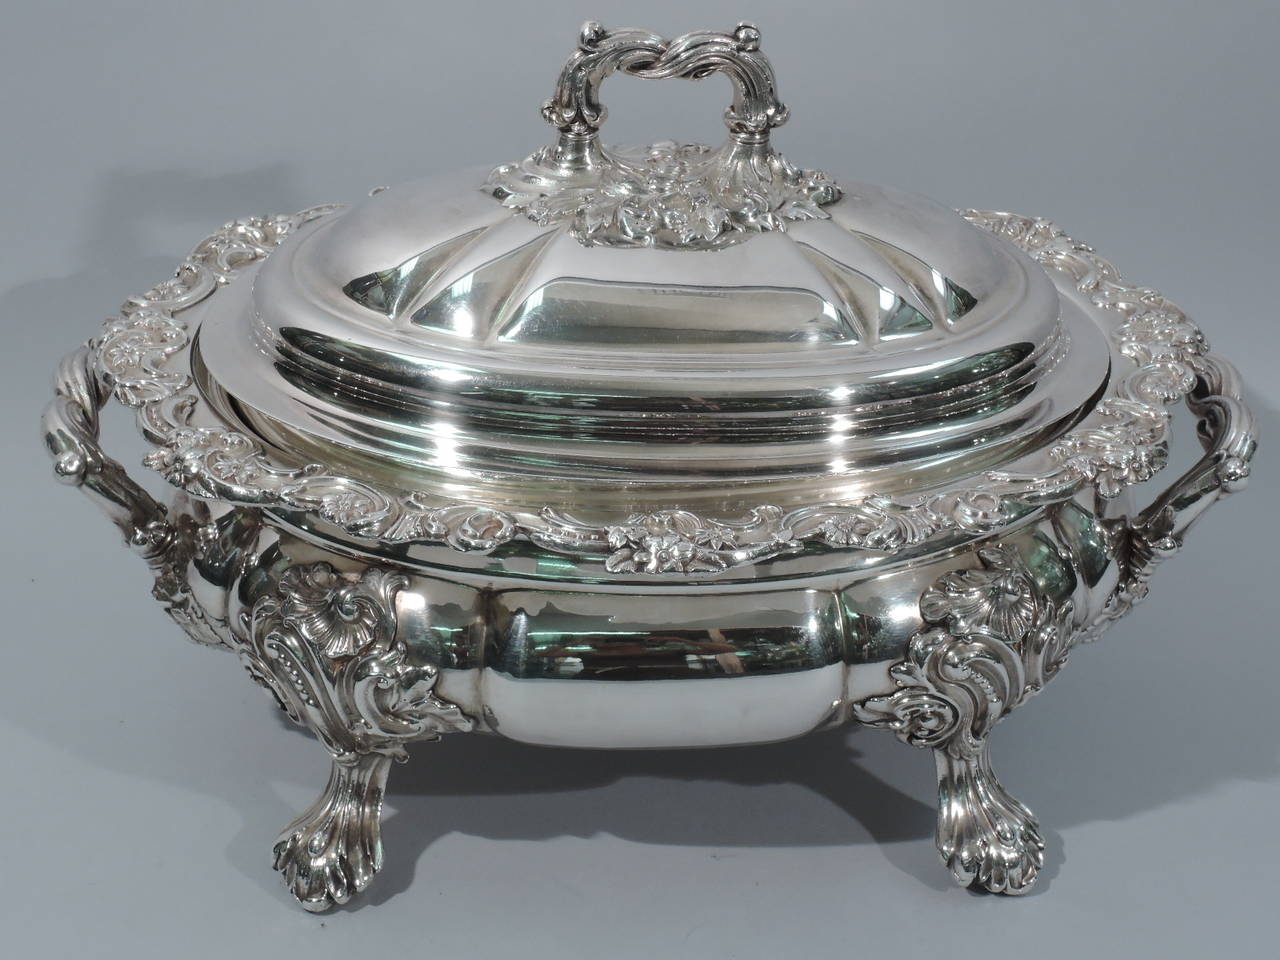 Georgian Sheffield plate soup tureen, circa 1820. Body is squat and lobed. Ornate mounts terminating in four paw supports. Scrolled bracket end handles with foliate mounts. Flat rim with applied scrolls and flowers. Cover is domed and lobed with